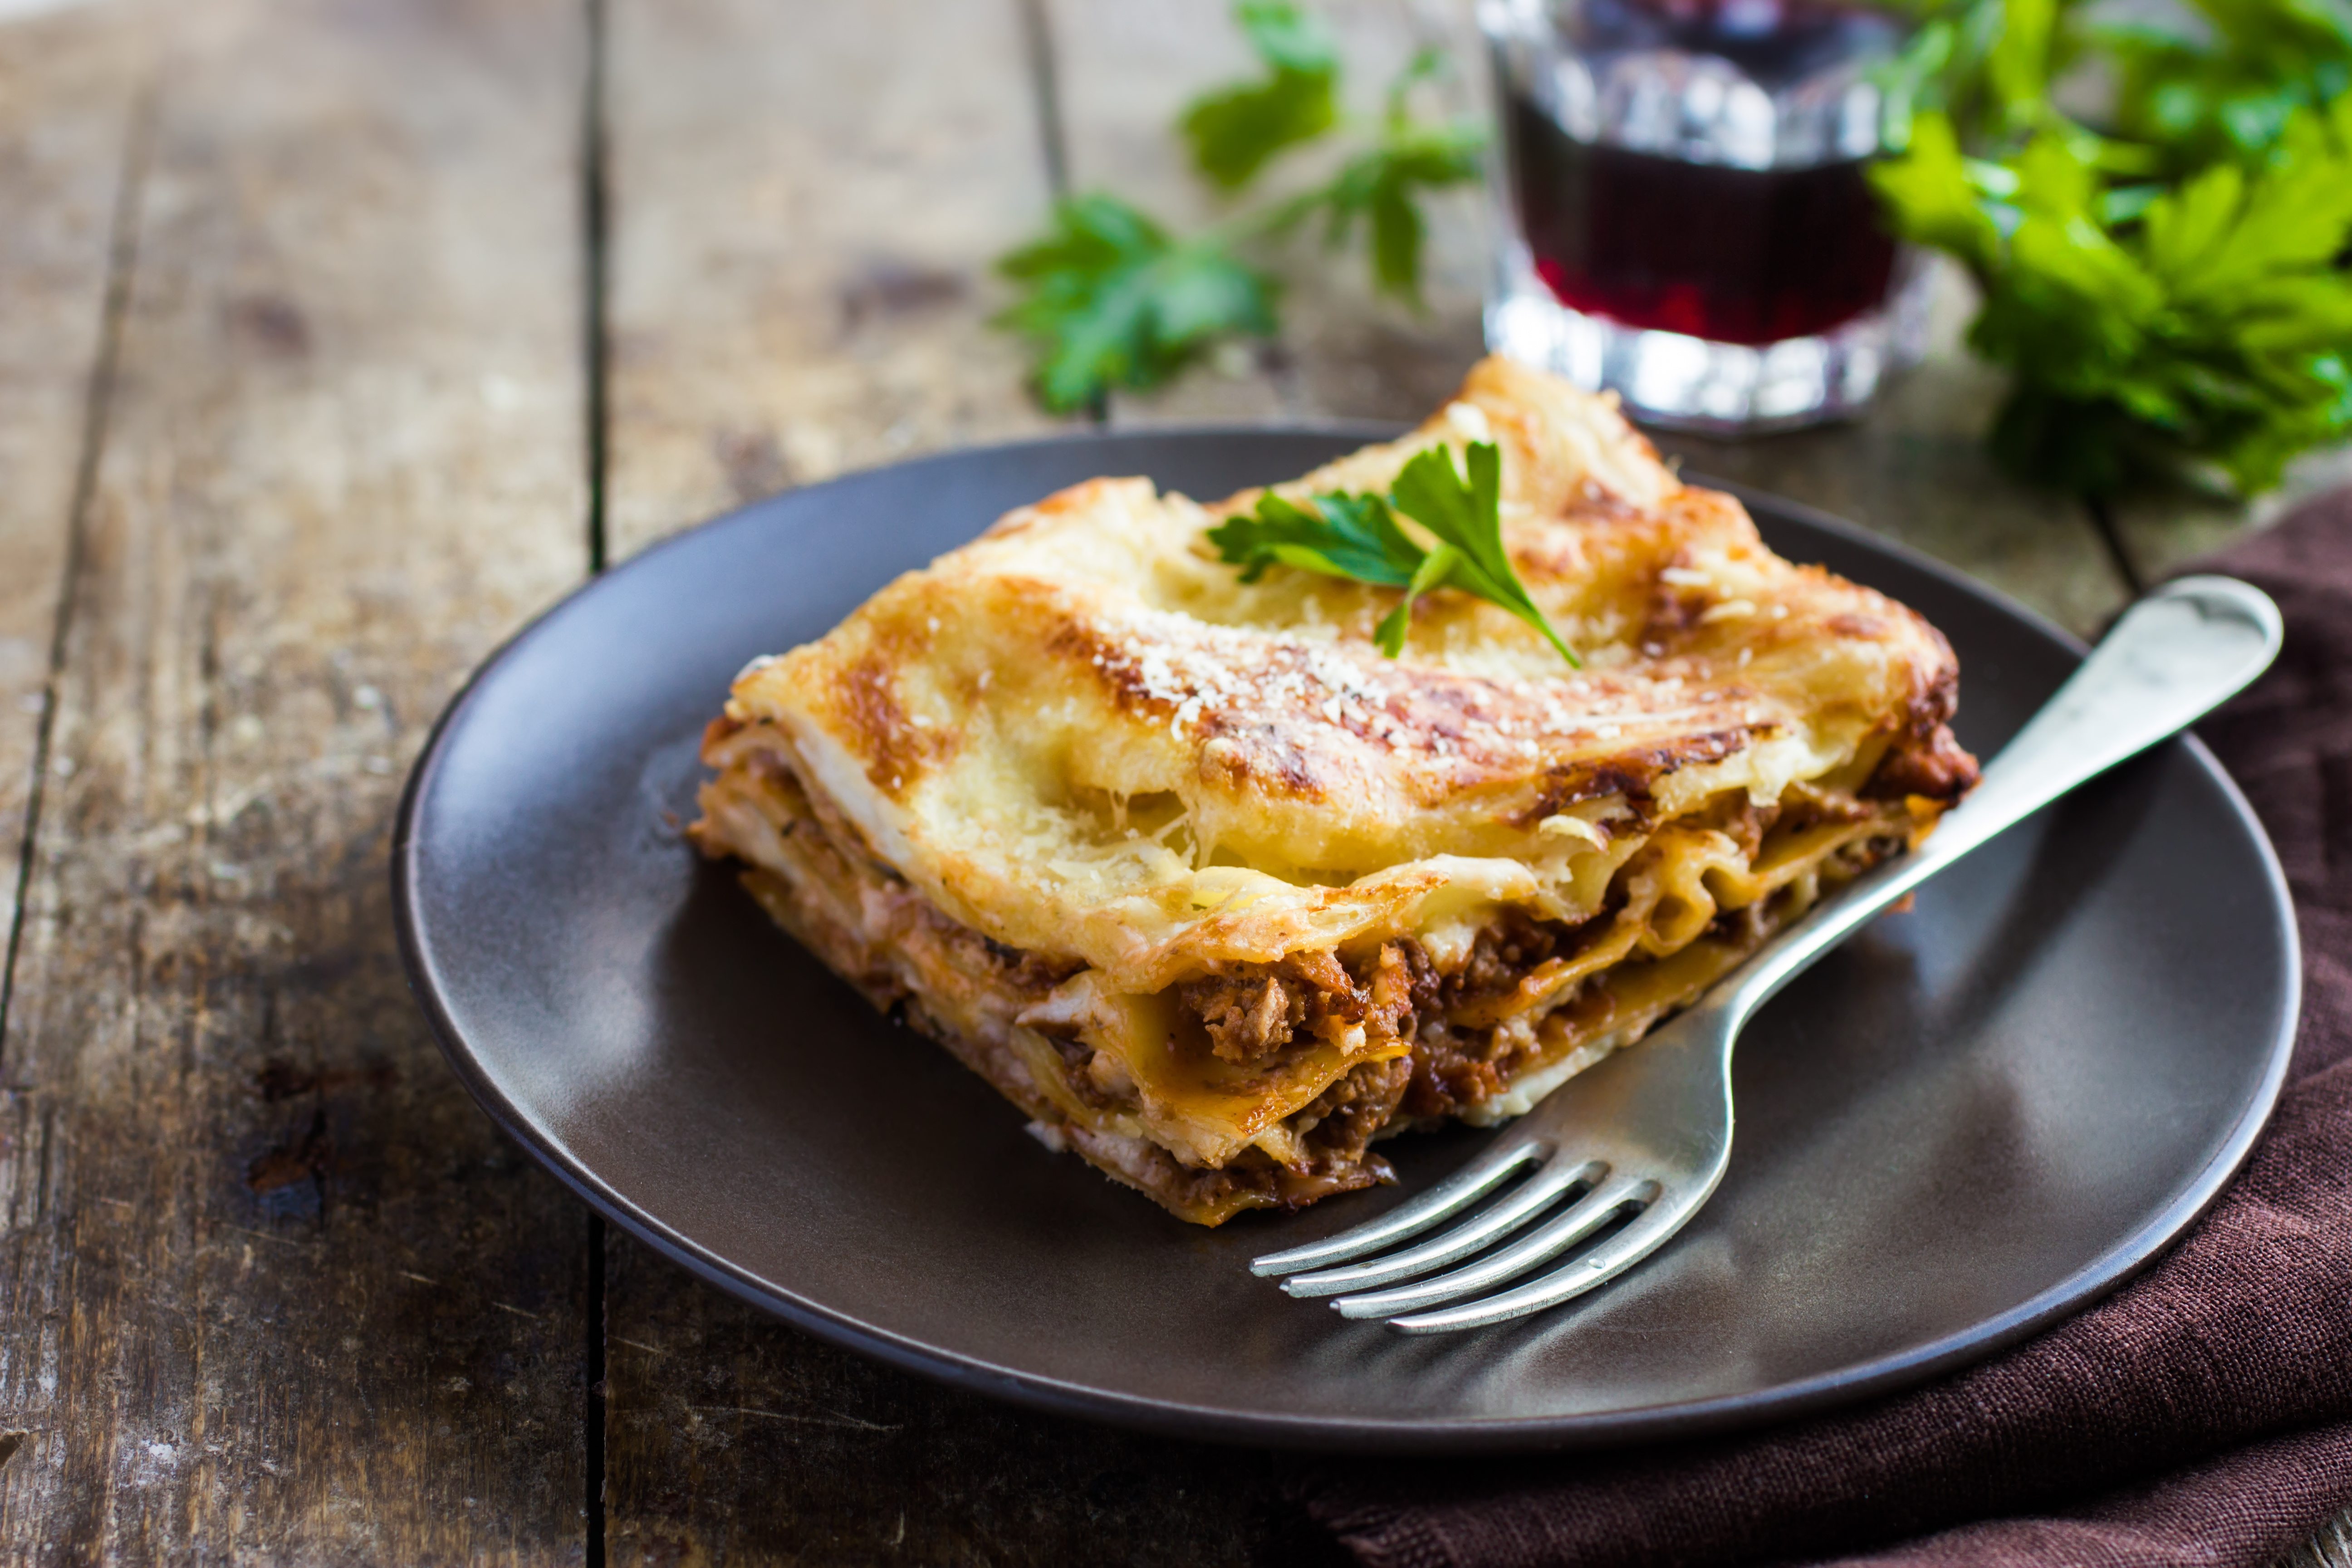 Traditional lasagna, ordered online and delivered - Prepared dish